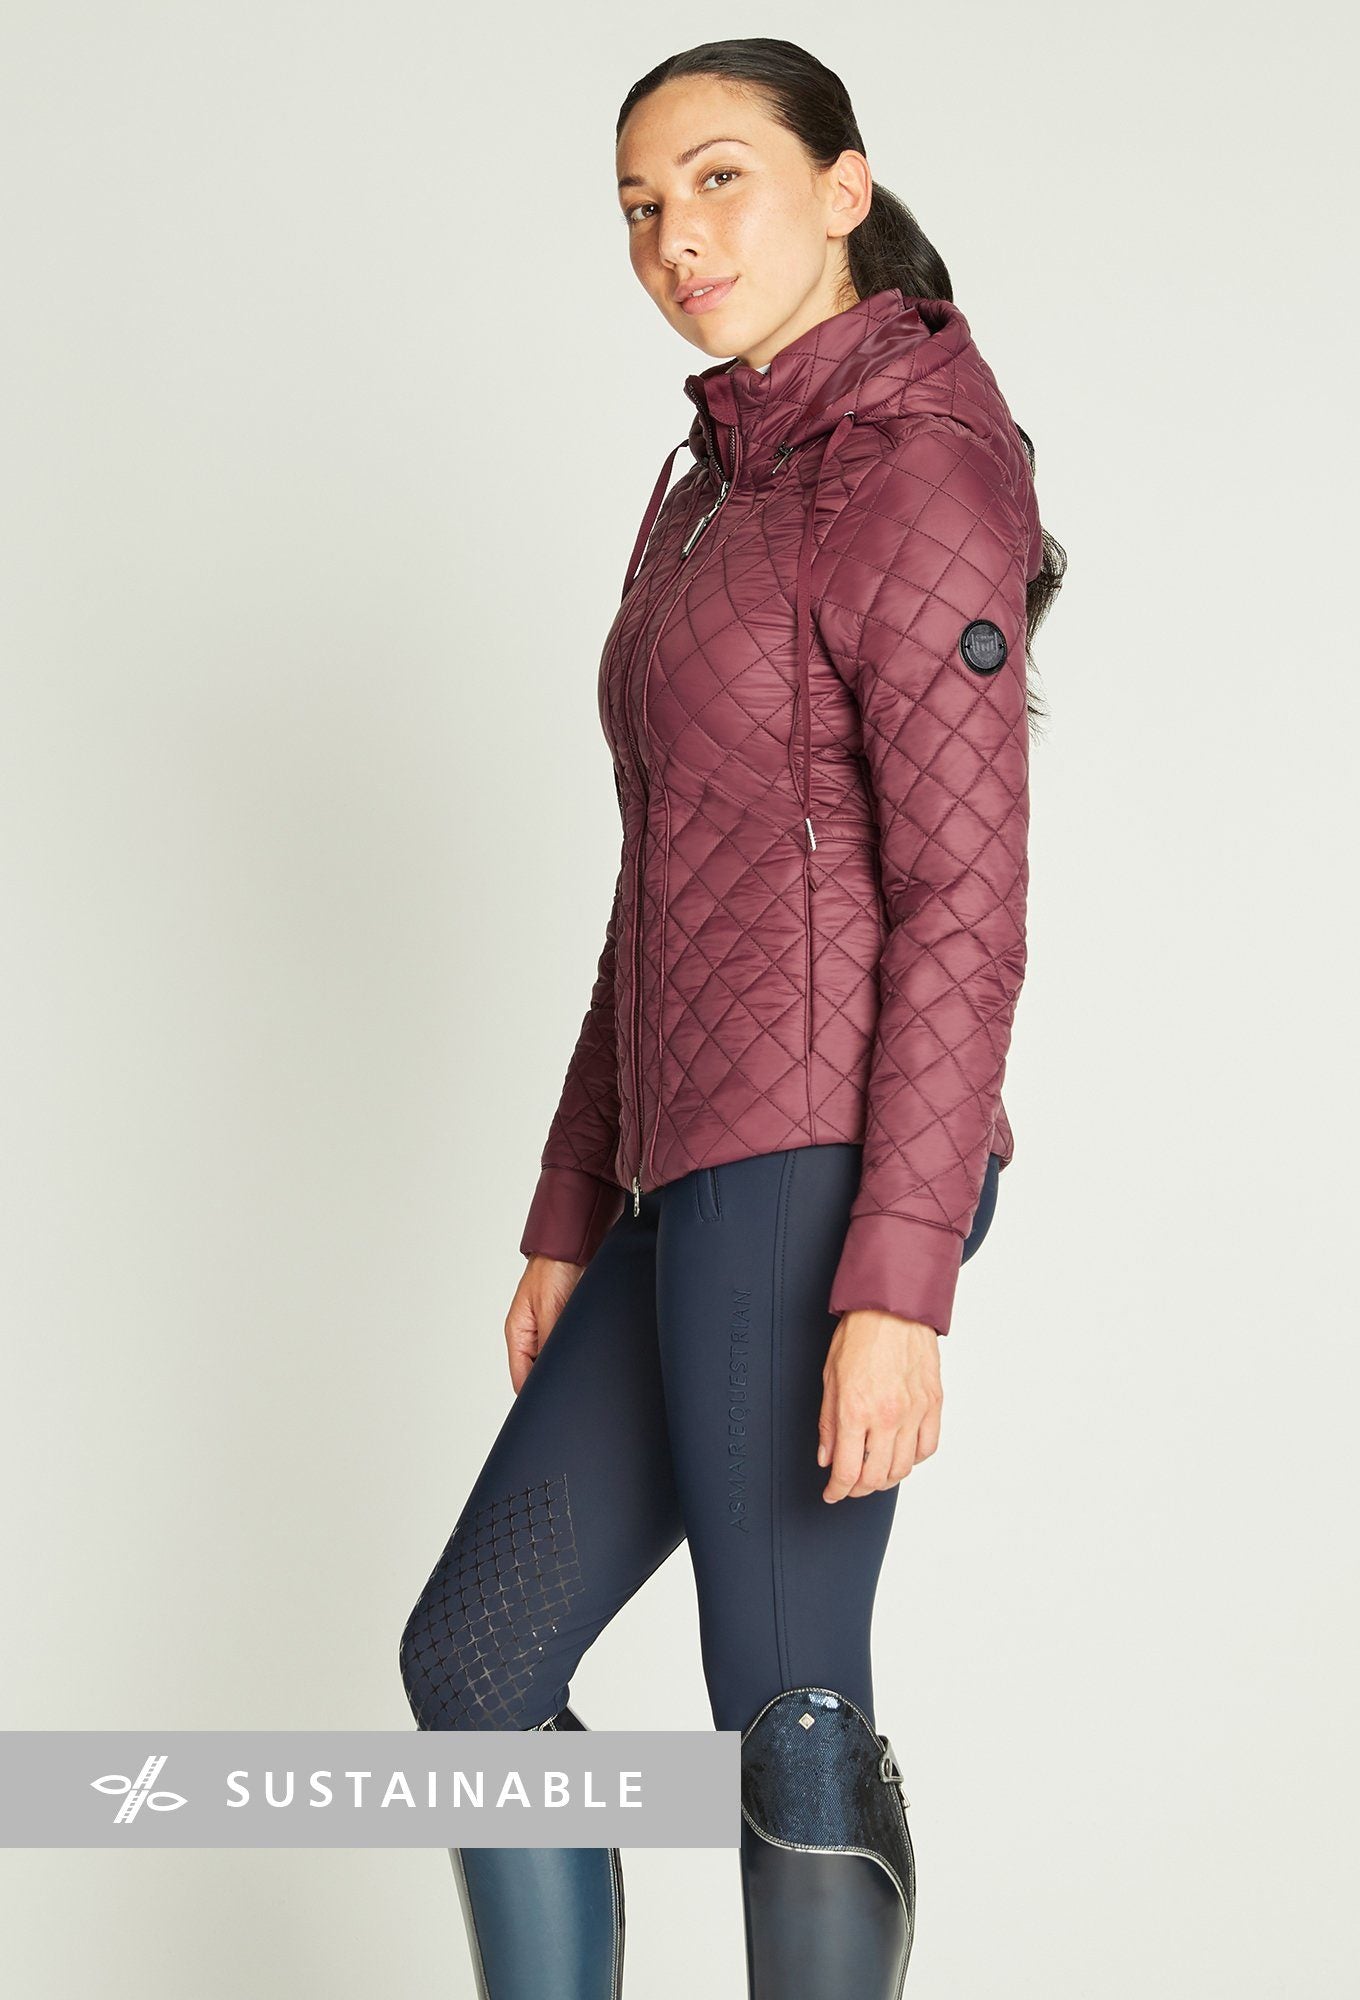 Woman wearing knee-length riding boots, blue riding leggings, maroon riding jacket.